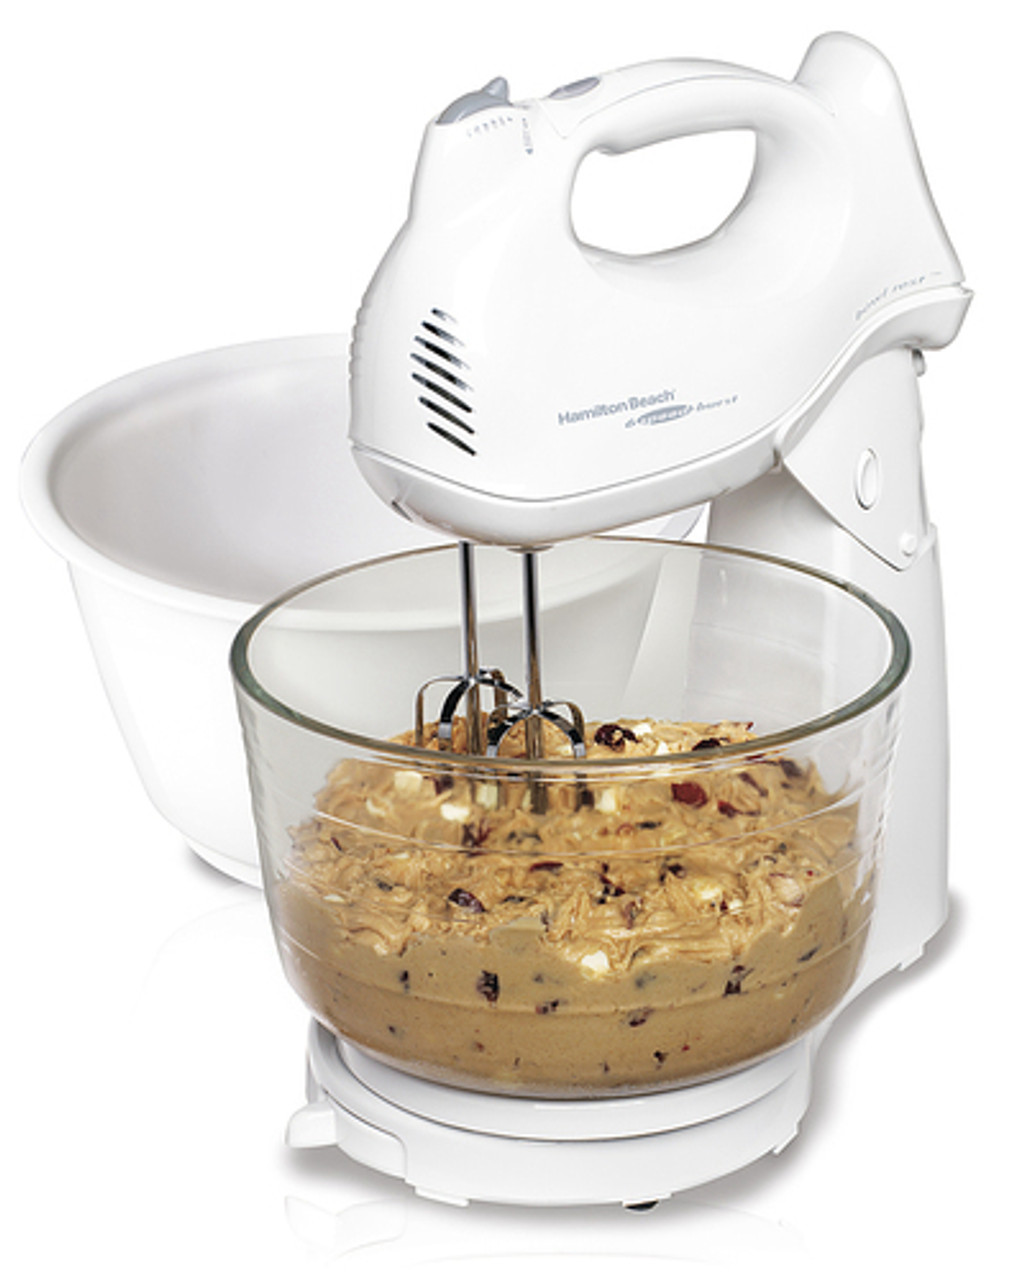 Hamilton Beach - Power Deluxe™ 6 Speed Stand Mixer with 2 Bowls - WHITE